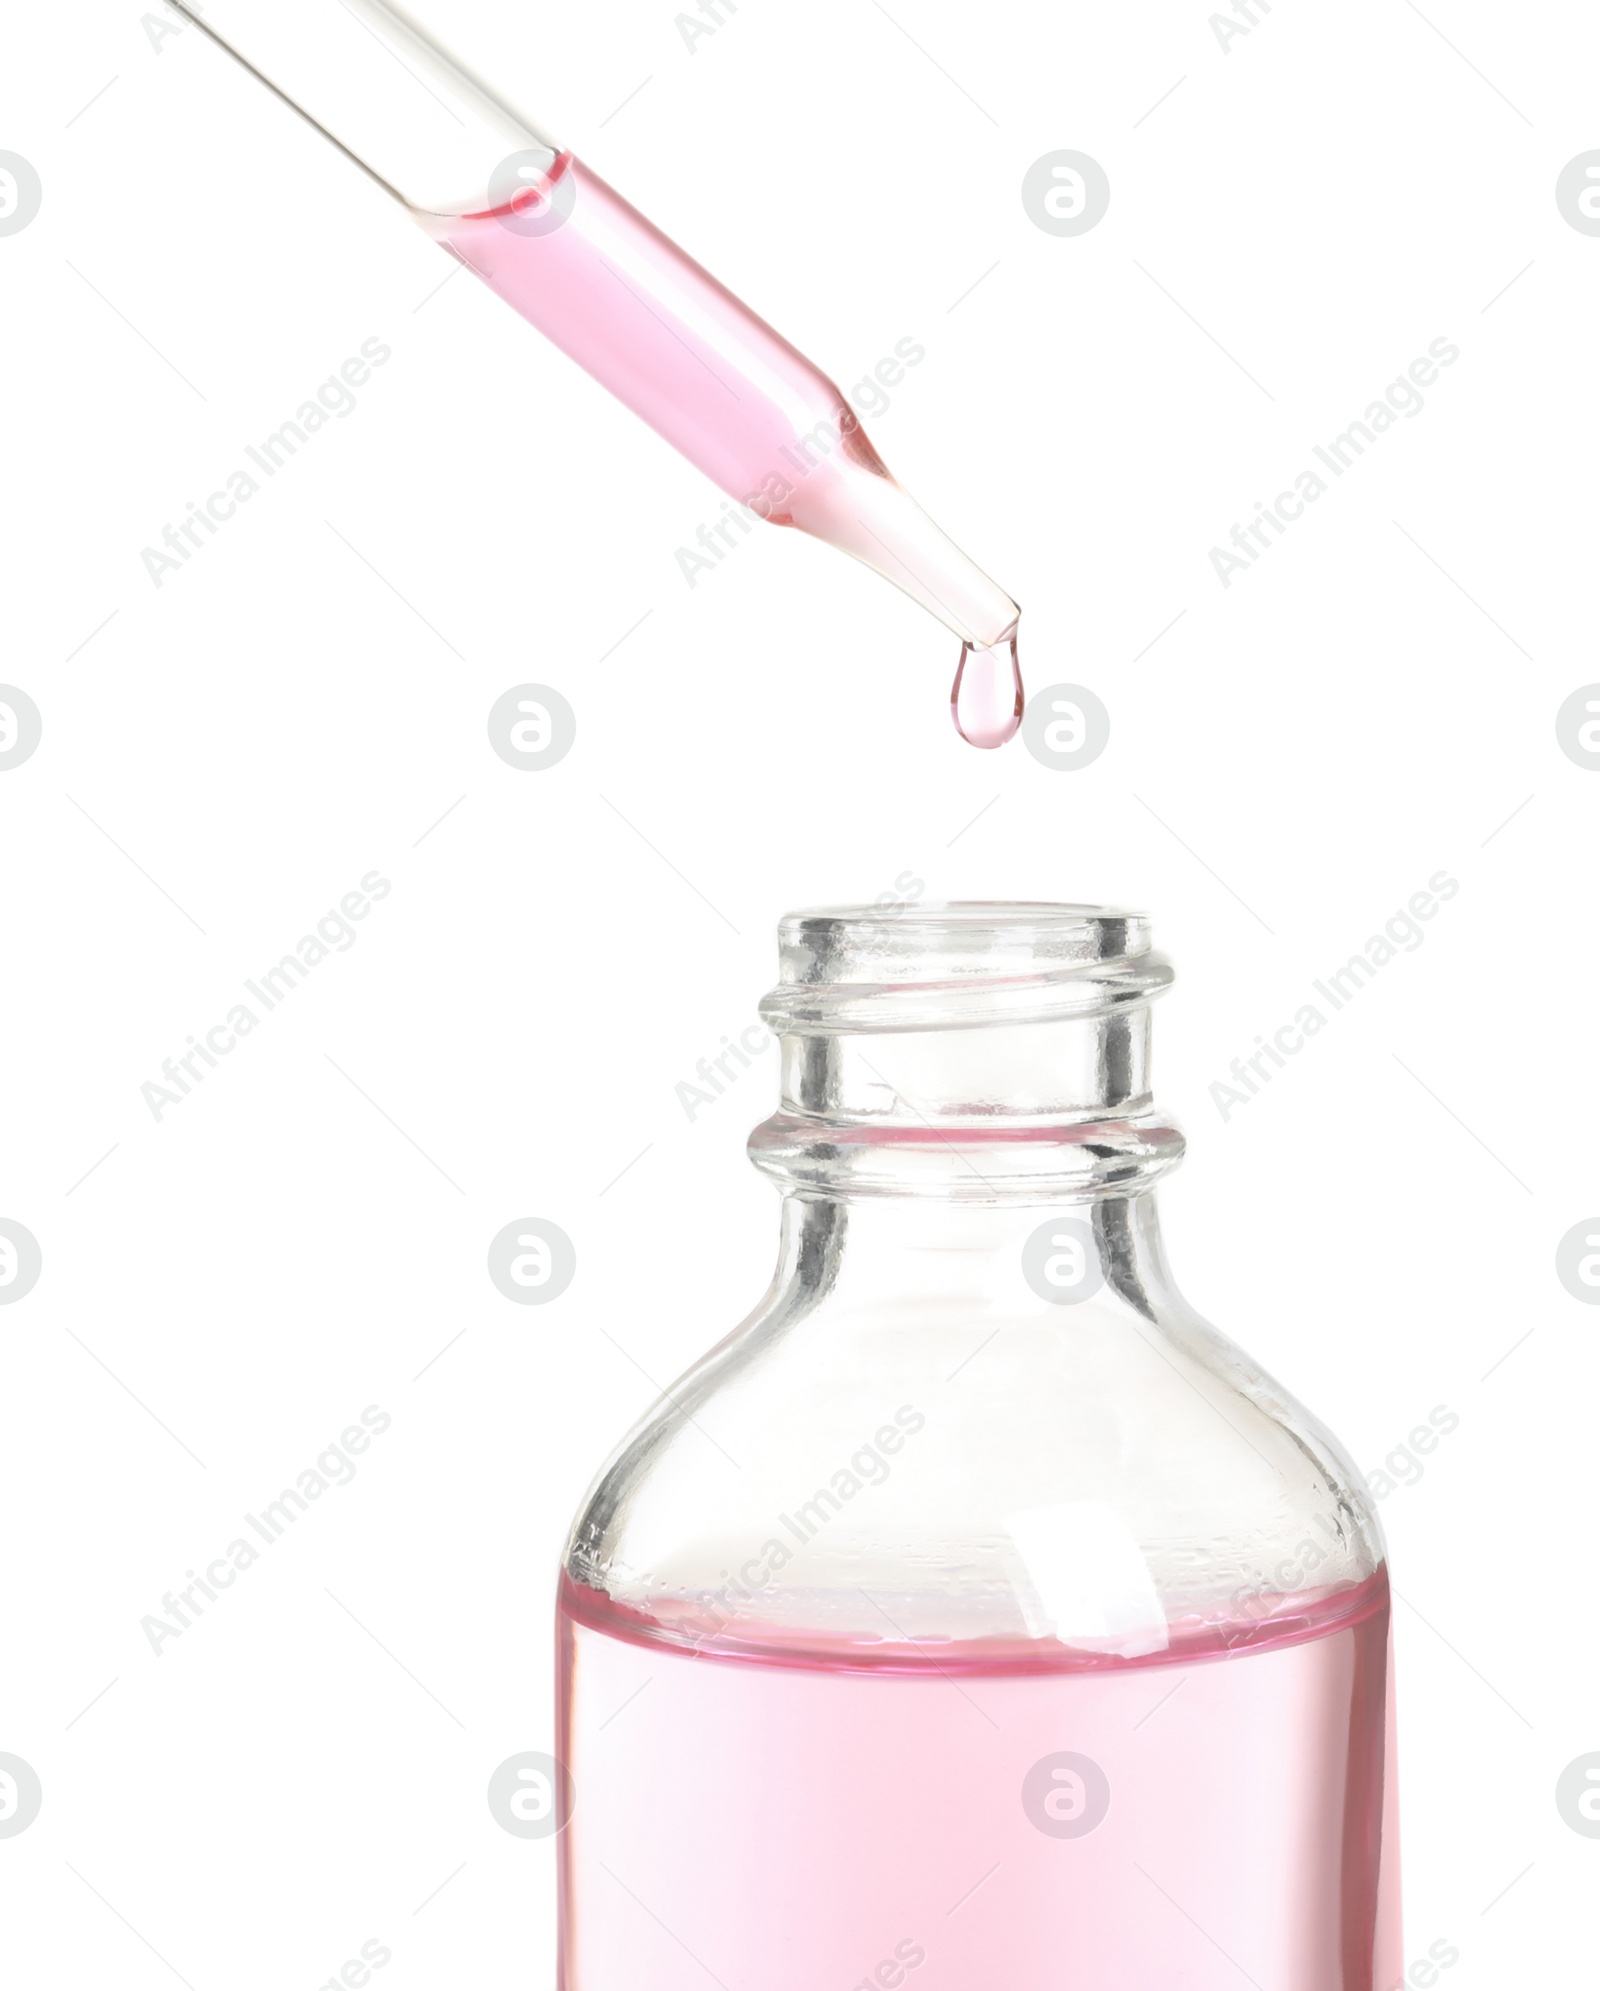 Photo of Dripping rose essential oil from pipette into bottle isolated on white